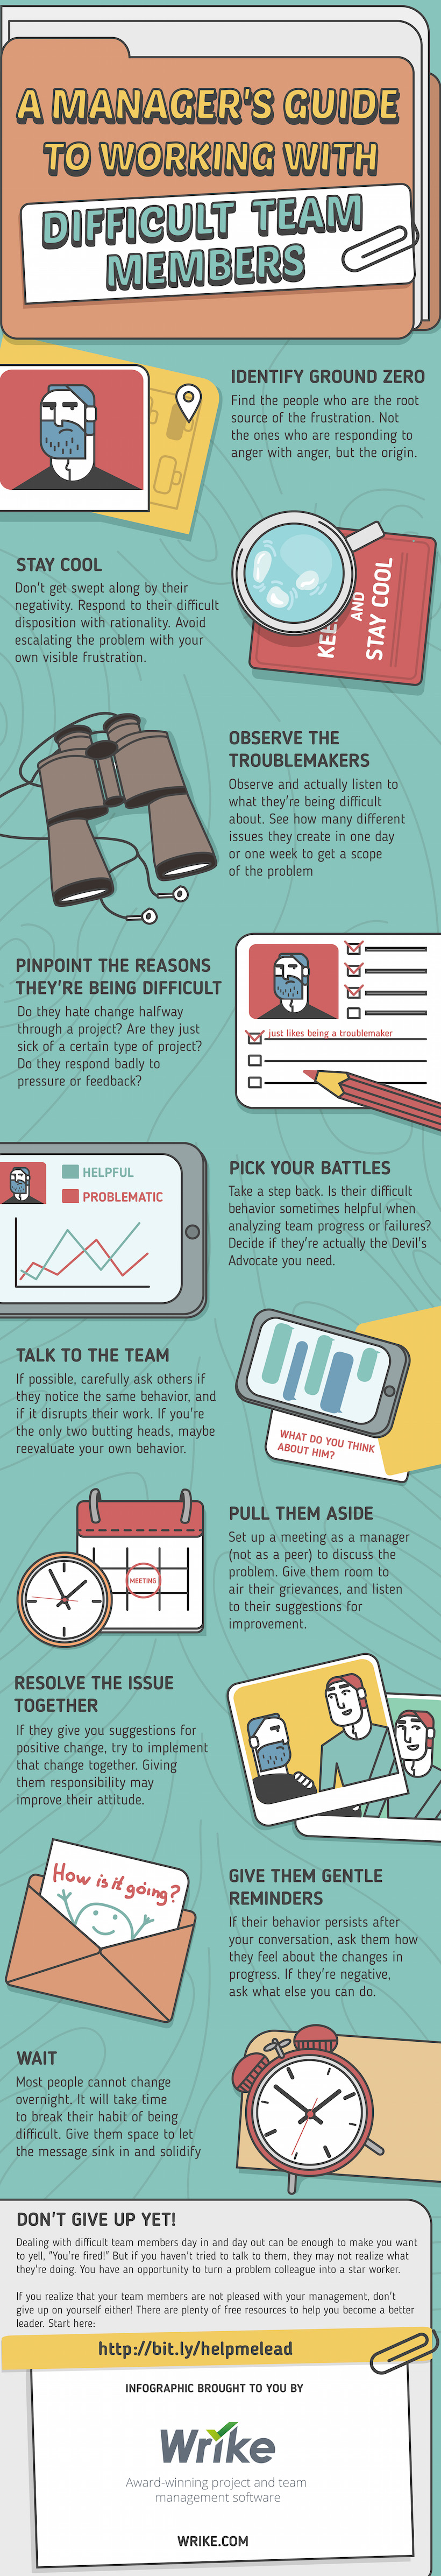 A Manager's Guide to Working with Difficult Team Members